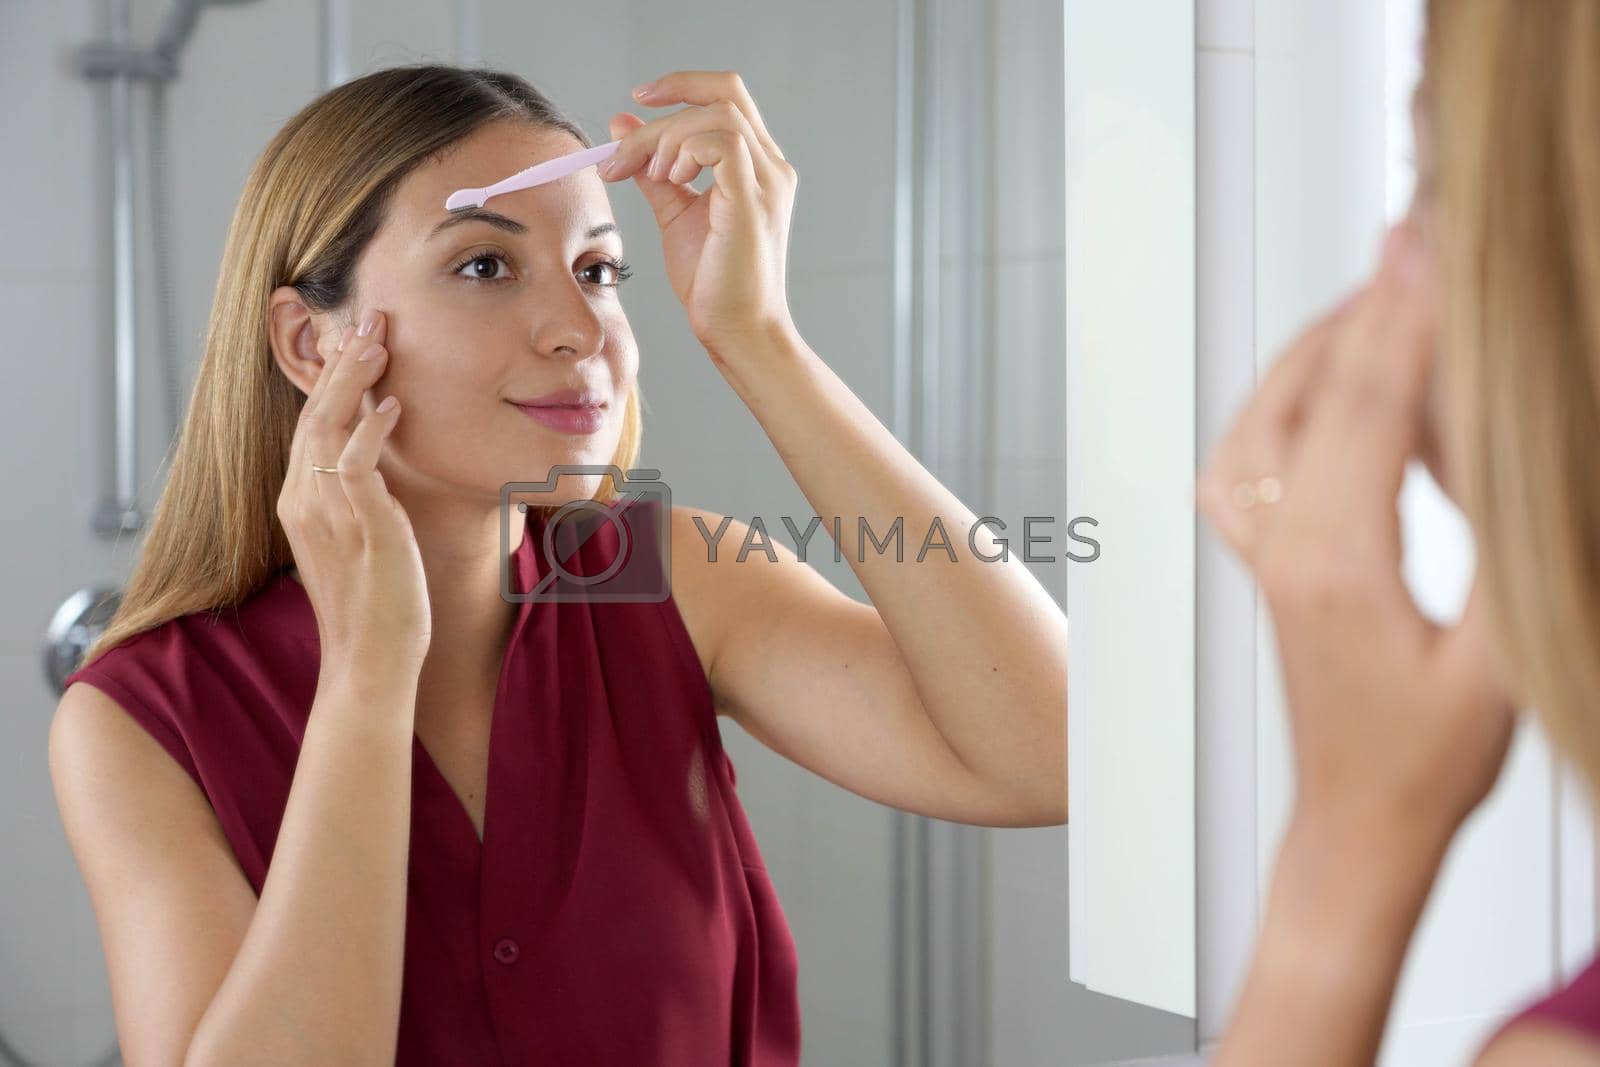 Royalty free image of Hispanic woman shaving her eyebrows with razor in the mirror at home by sergio_monti